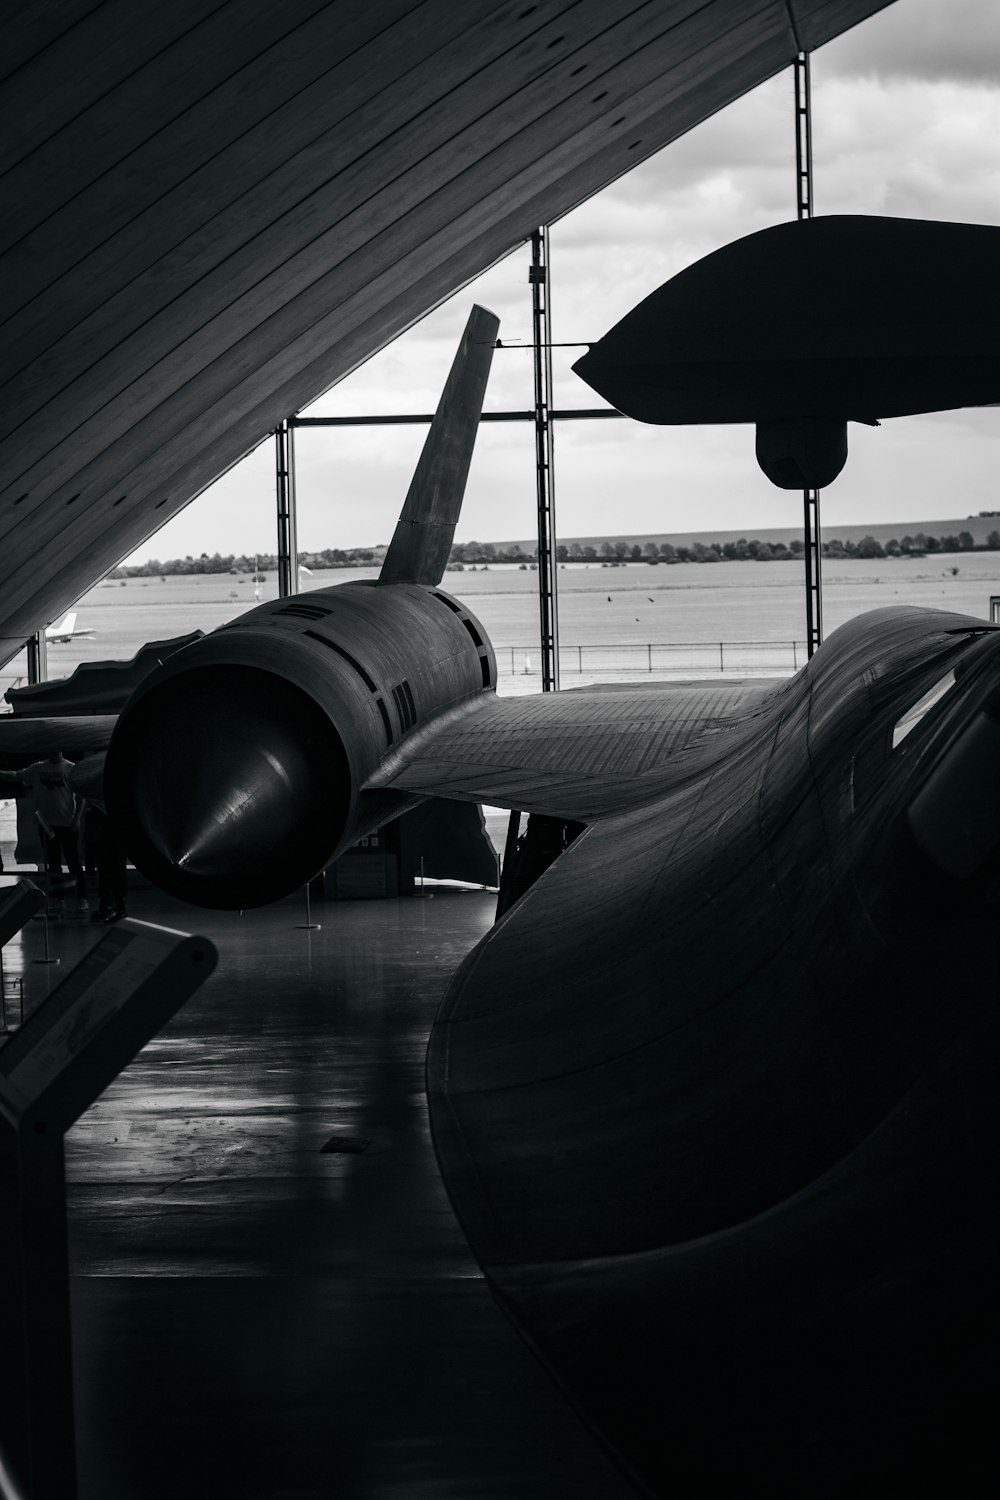 a black and white photo of a plane in a hangar